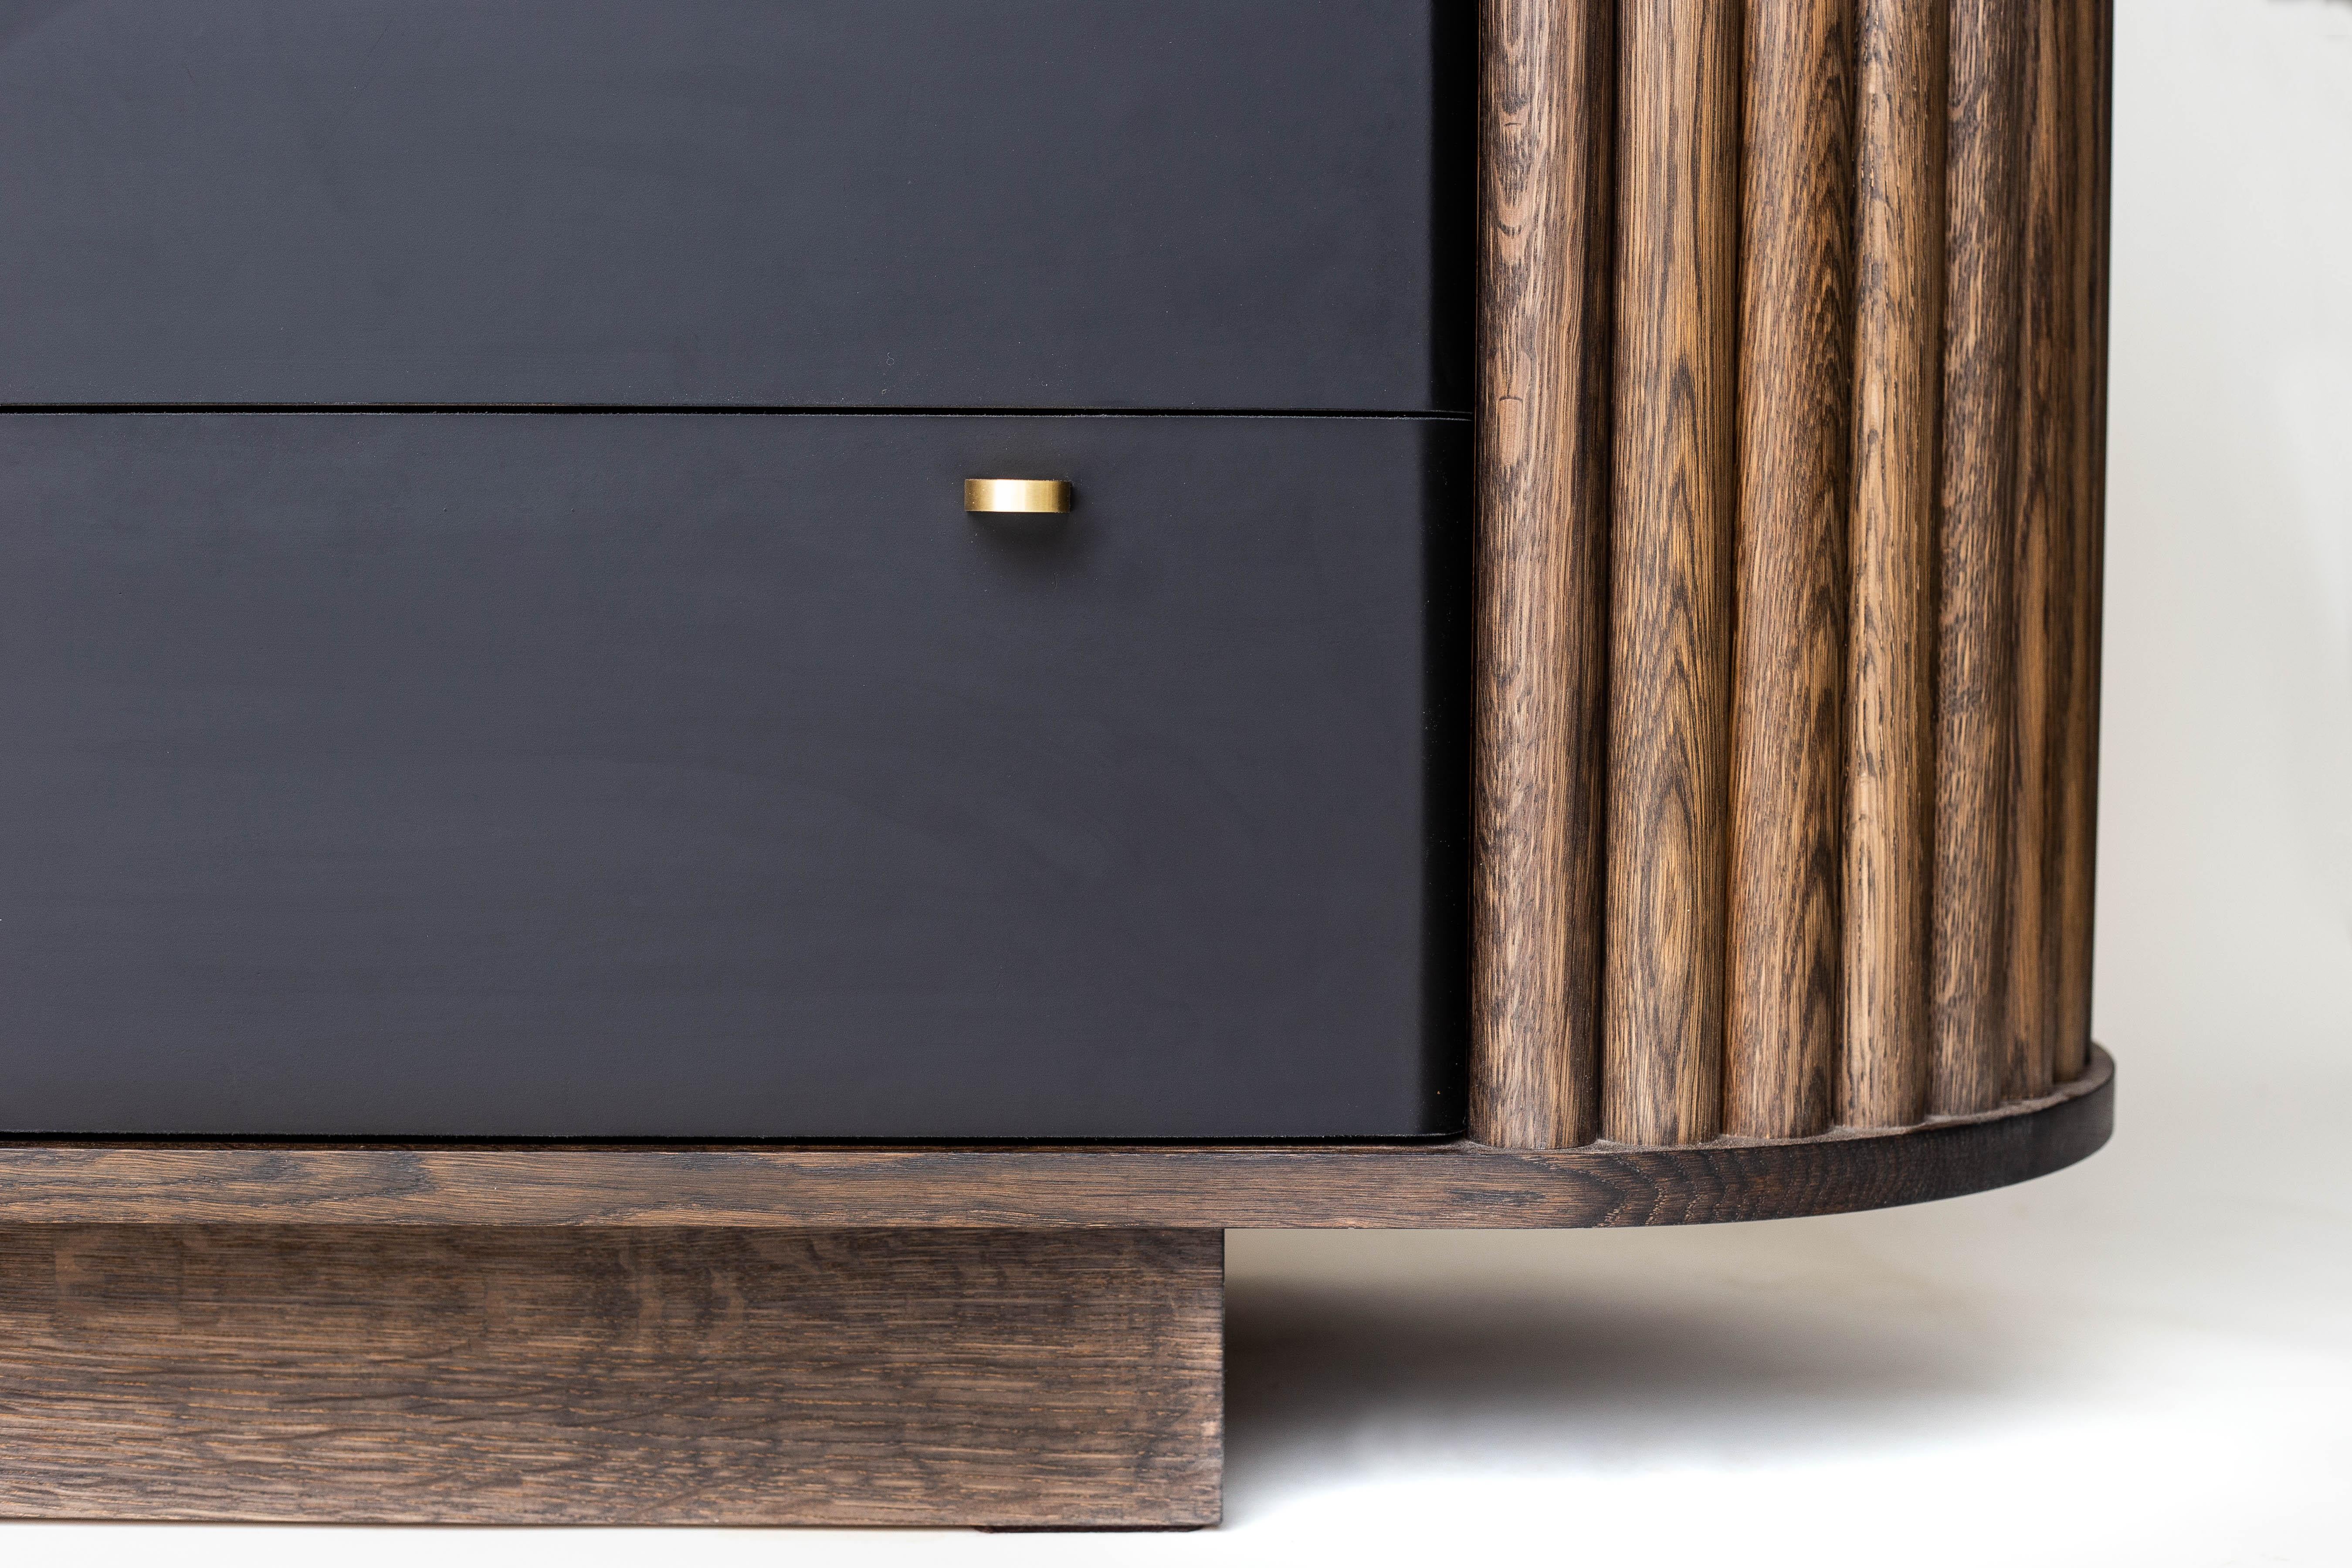 Designed to be noticed and built to last for generations. Our Credenza's strong lines and bold structure are borrowed from the architecture of the Brutalist movement. Solid hardwoods, thick leather and exclusive brass pulls wrap this piece in